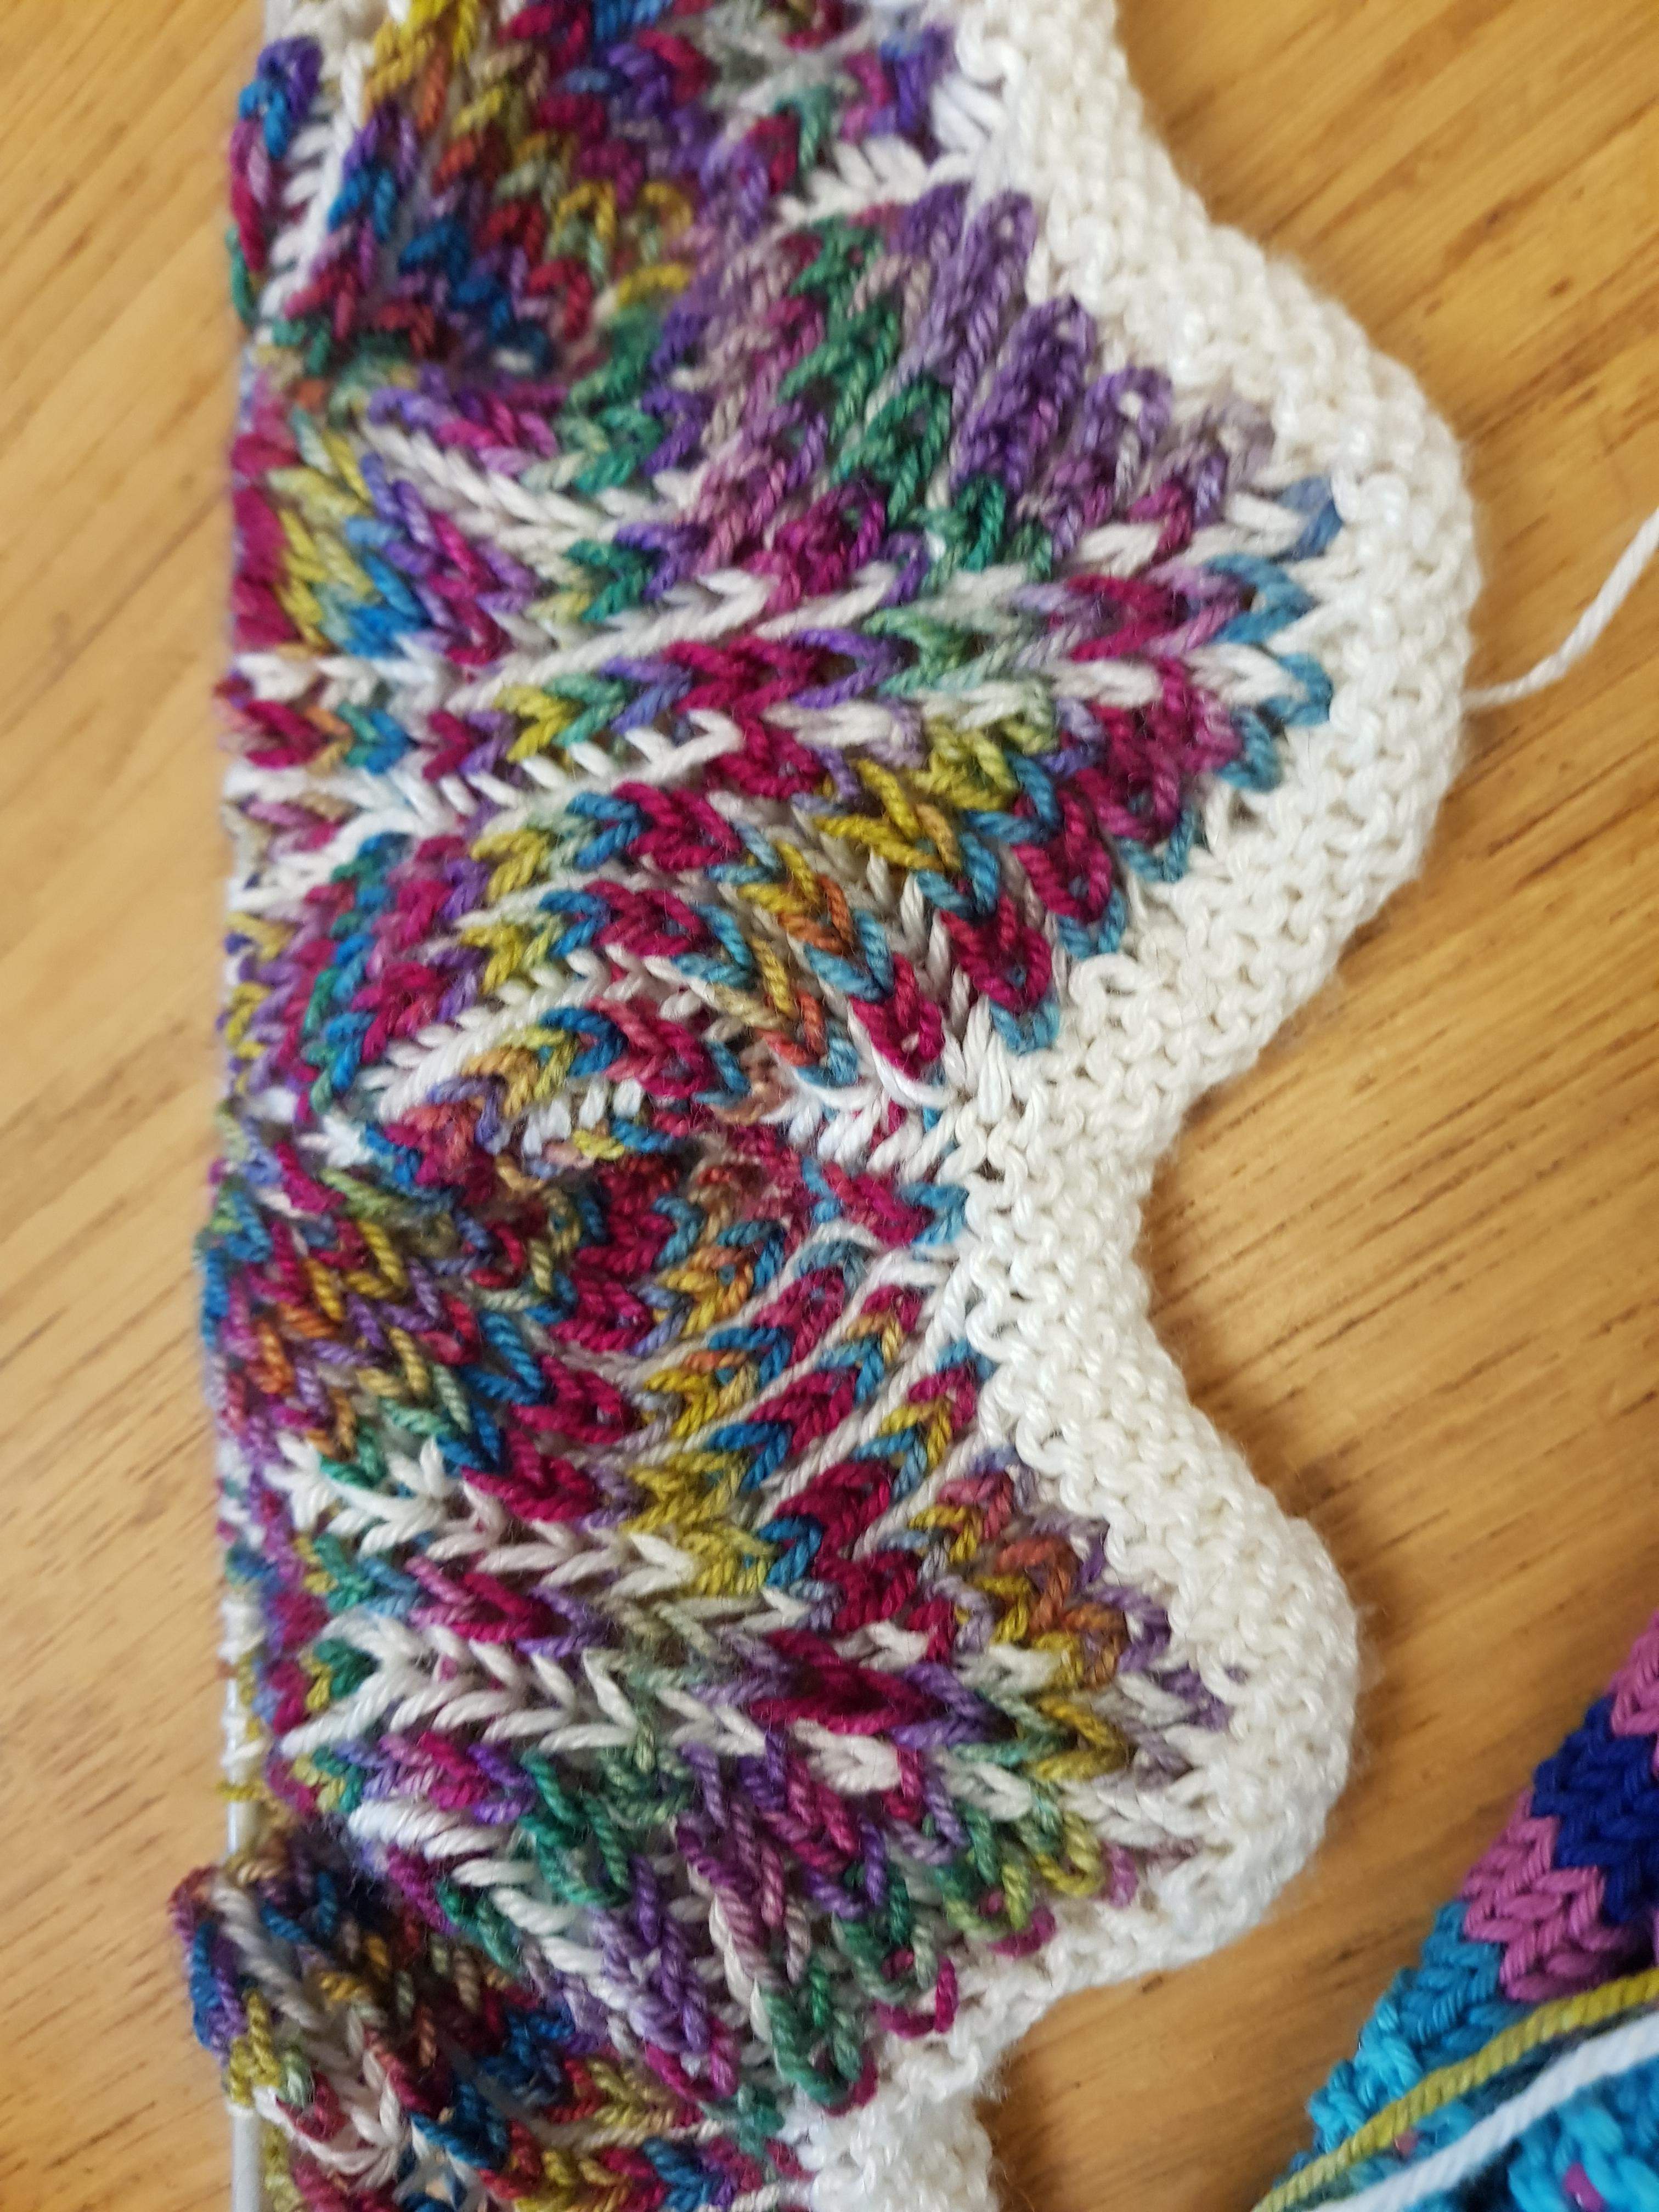 June knitting and crochet retreat - the projects